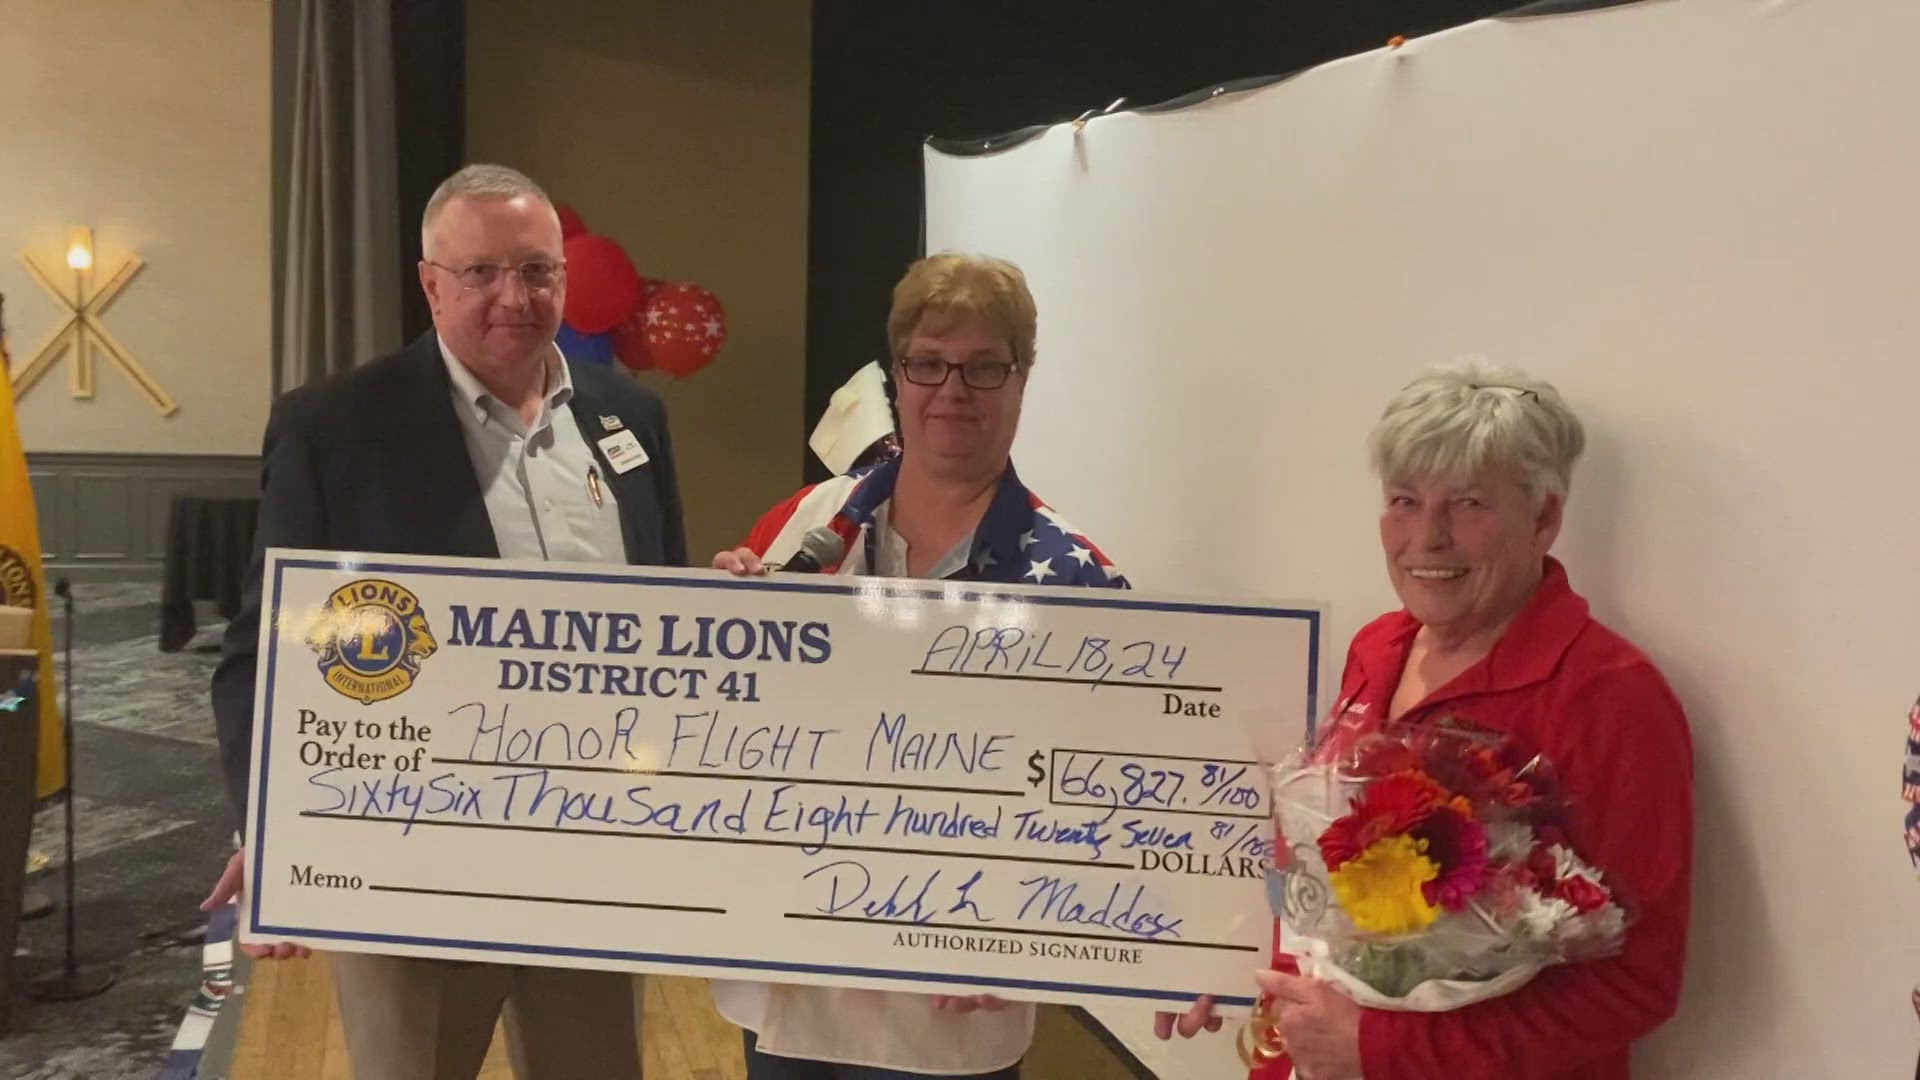 The group presented a check for $65,000 to Honor Flight Maine's chairman. It's the second highest single donation ever.